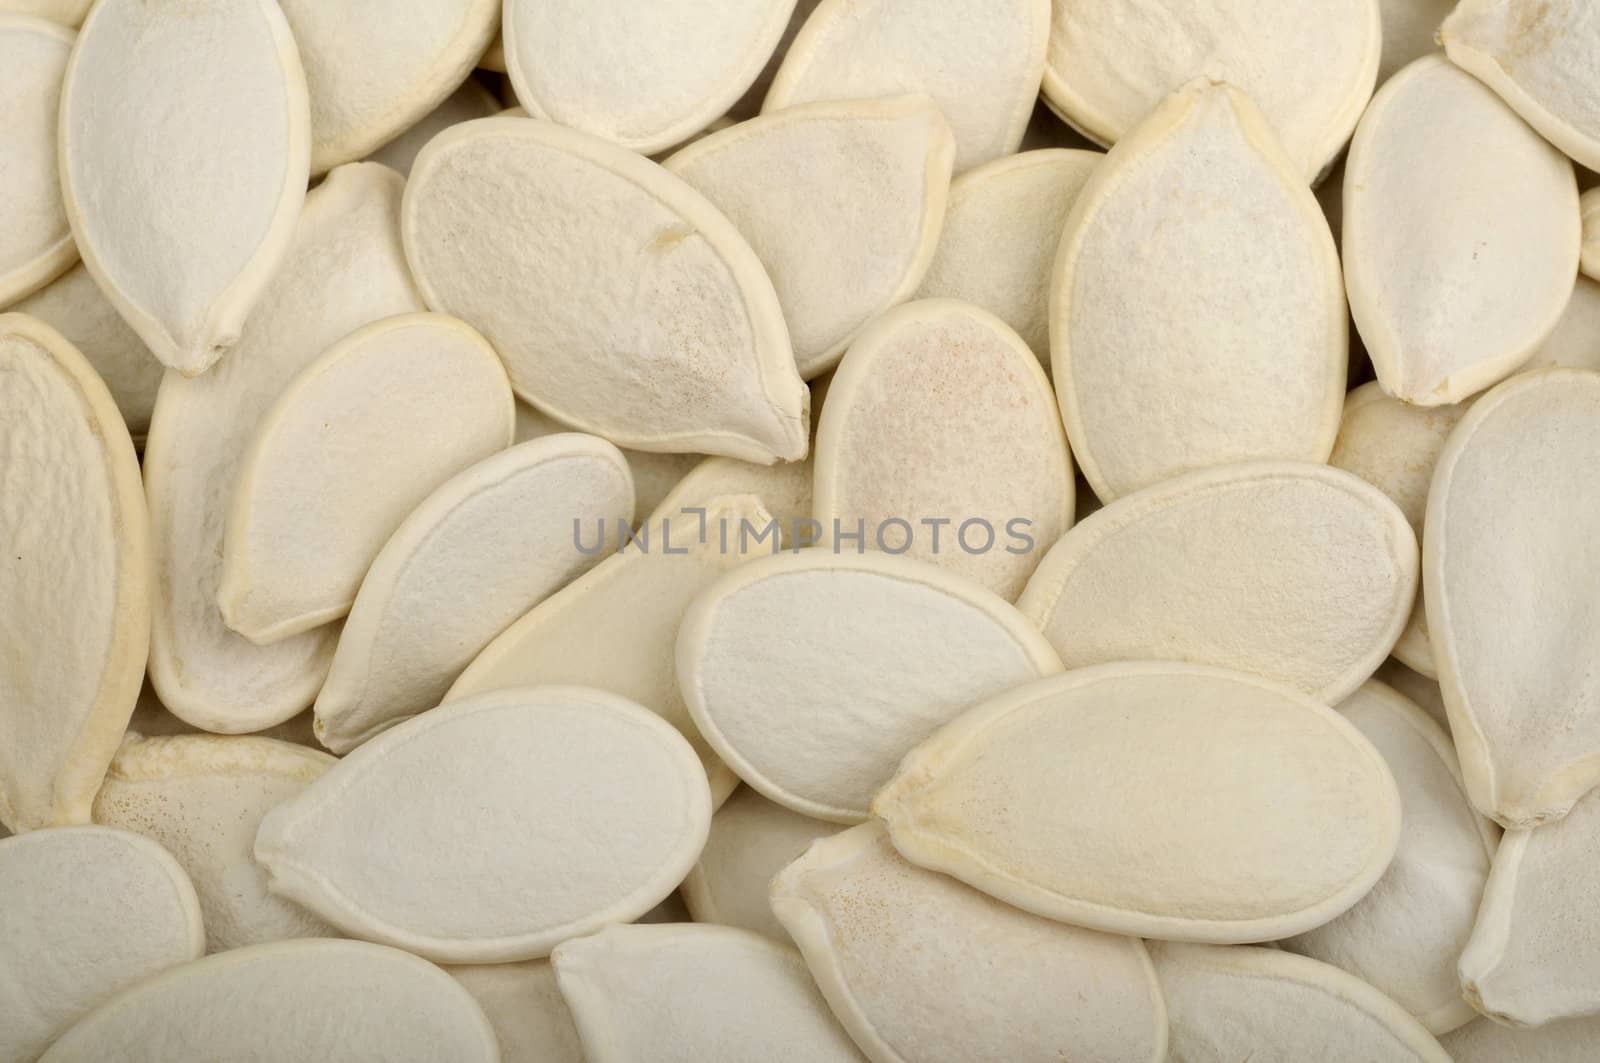 background of the pumpkin seeds in shell